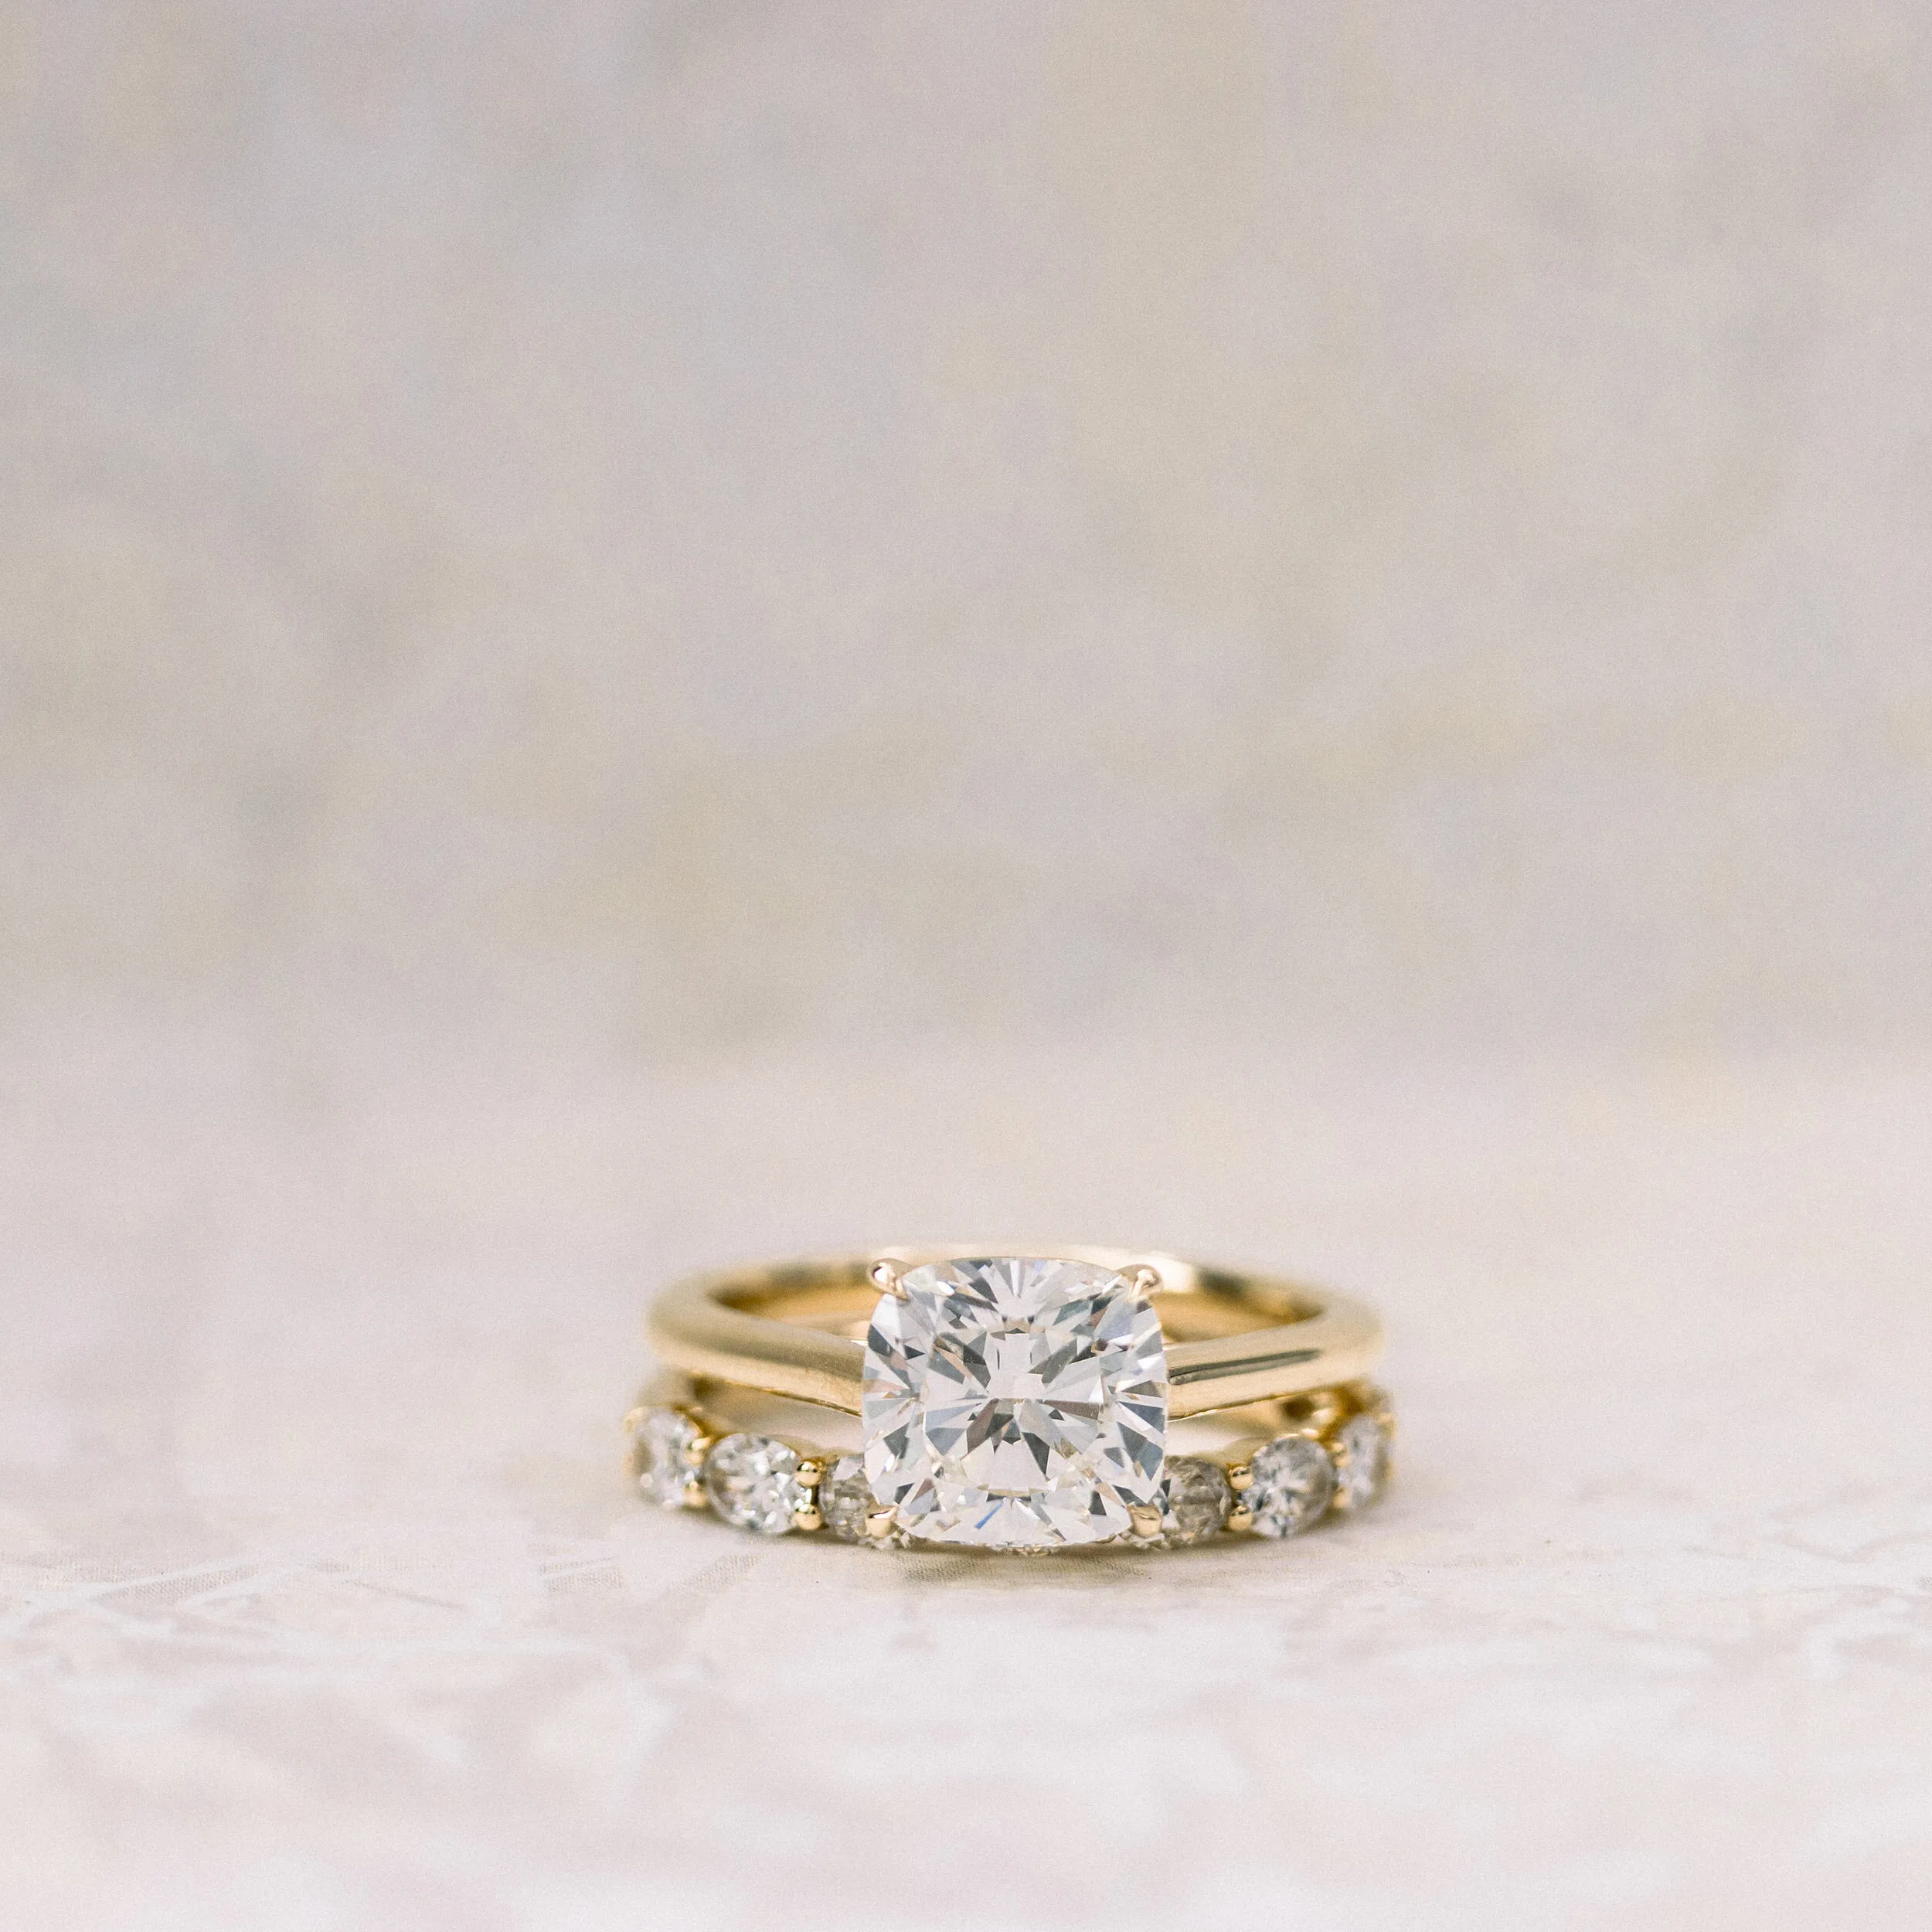 14k Yellow Gold 2ct Cushion Cut Cathedral Lab Diamond Solitaire Engagement Ring Ada Diamonds Design AD-334 with Wedding Band